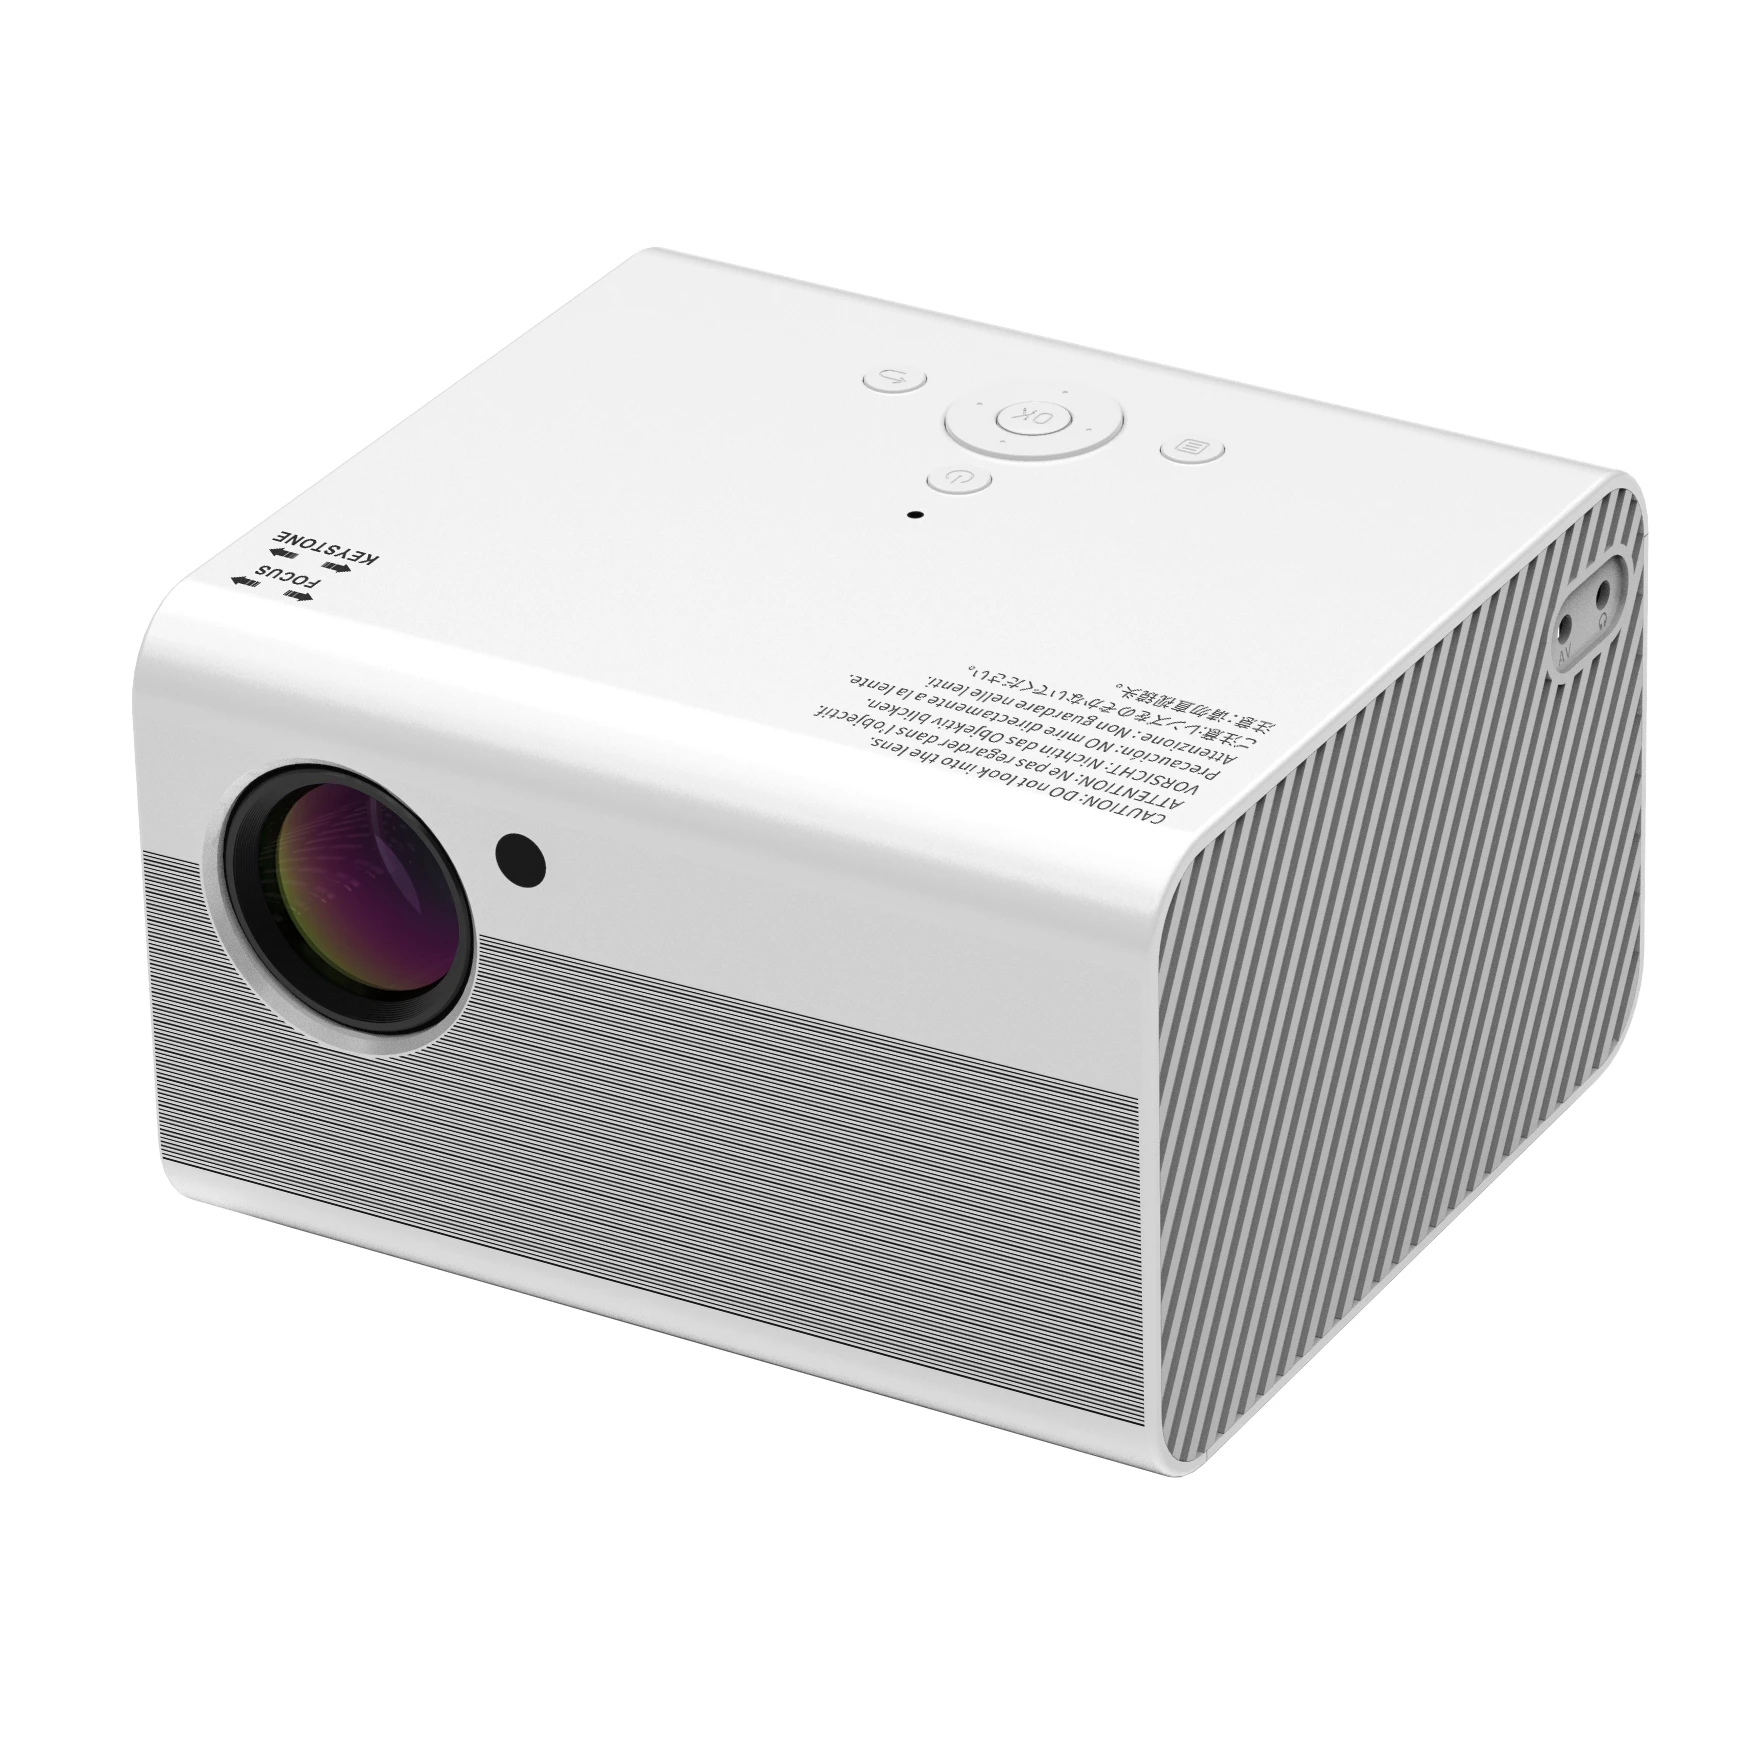 

T10 Full HD 1080P Projector Mini LED Proyector Native 1920x1080 4500 Lumens Android Home Theater Video Beamer Android version, 16.7k